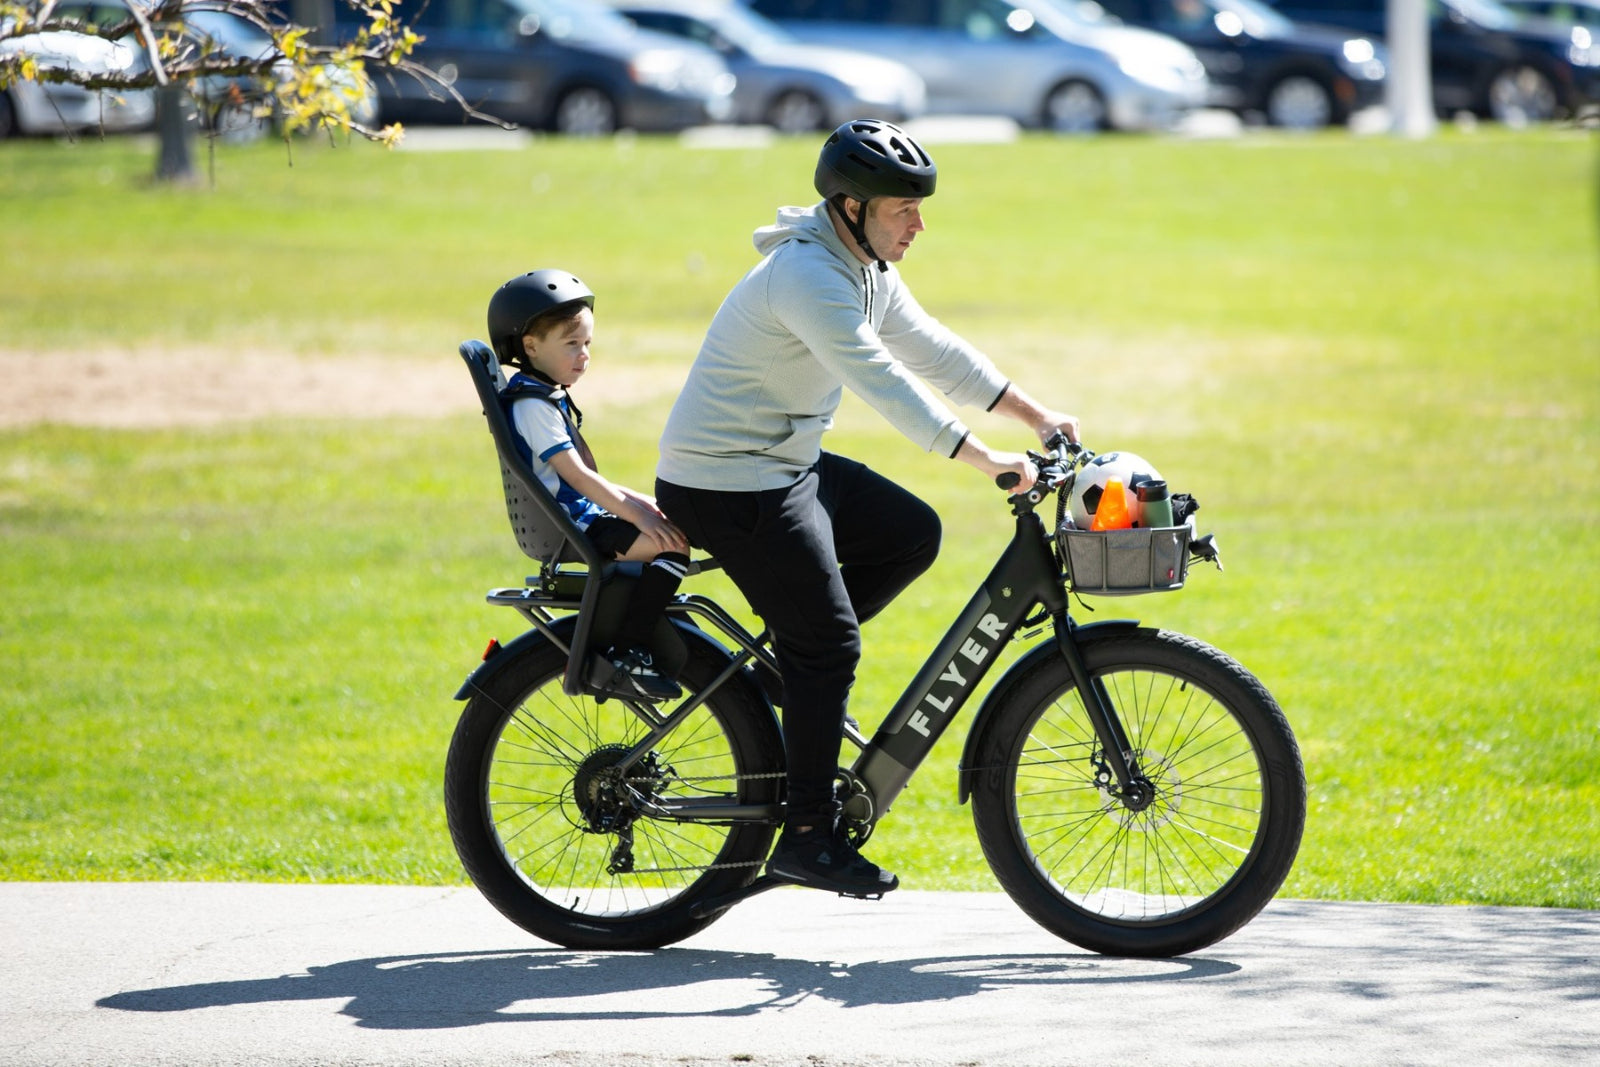 eBikes 101: 5 Ways to Use an Electric Bike